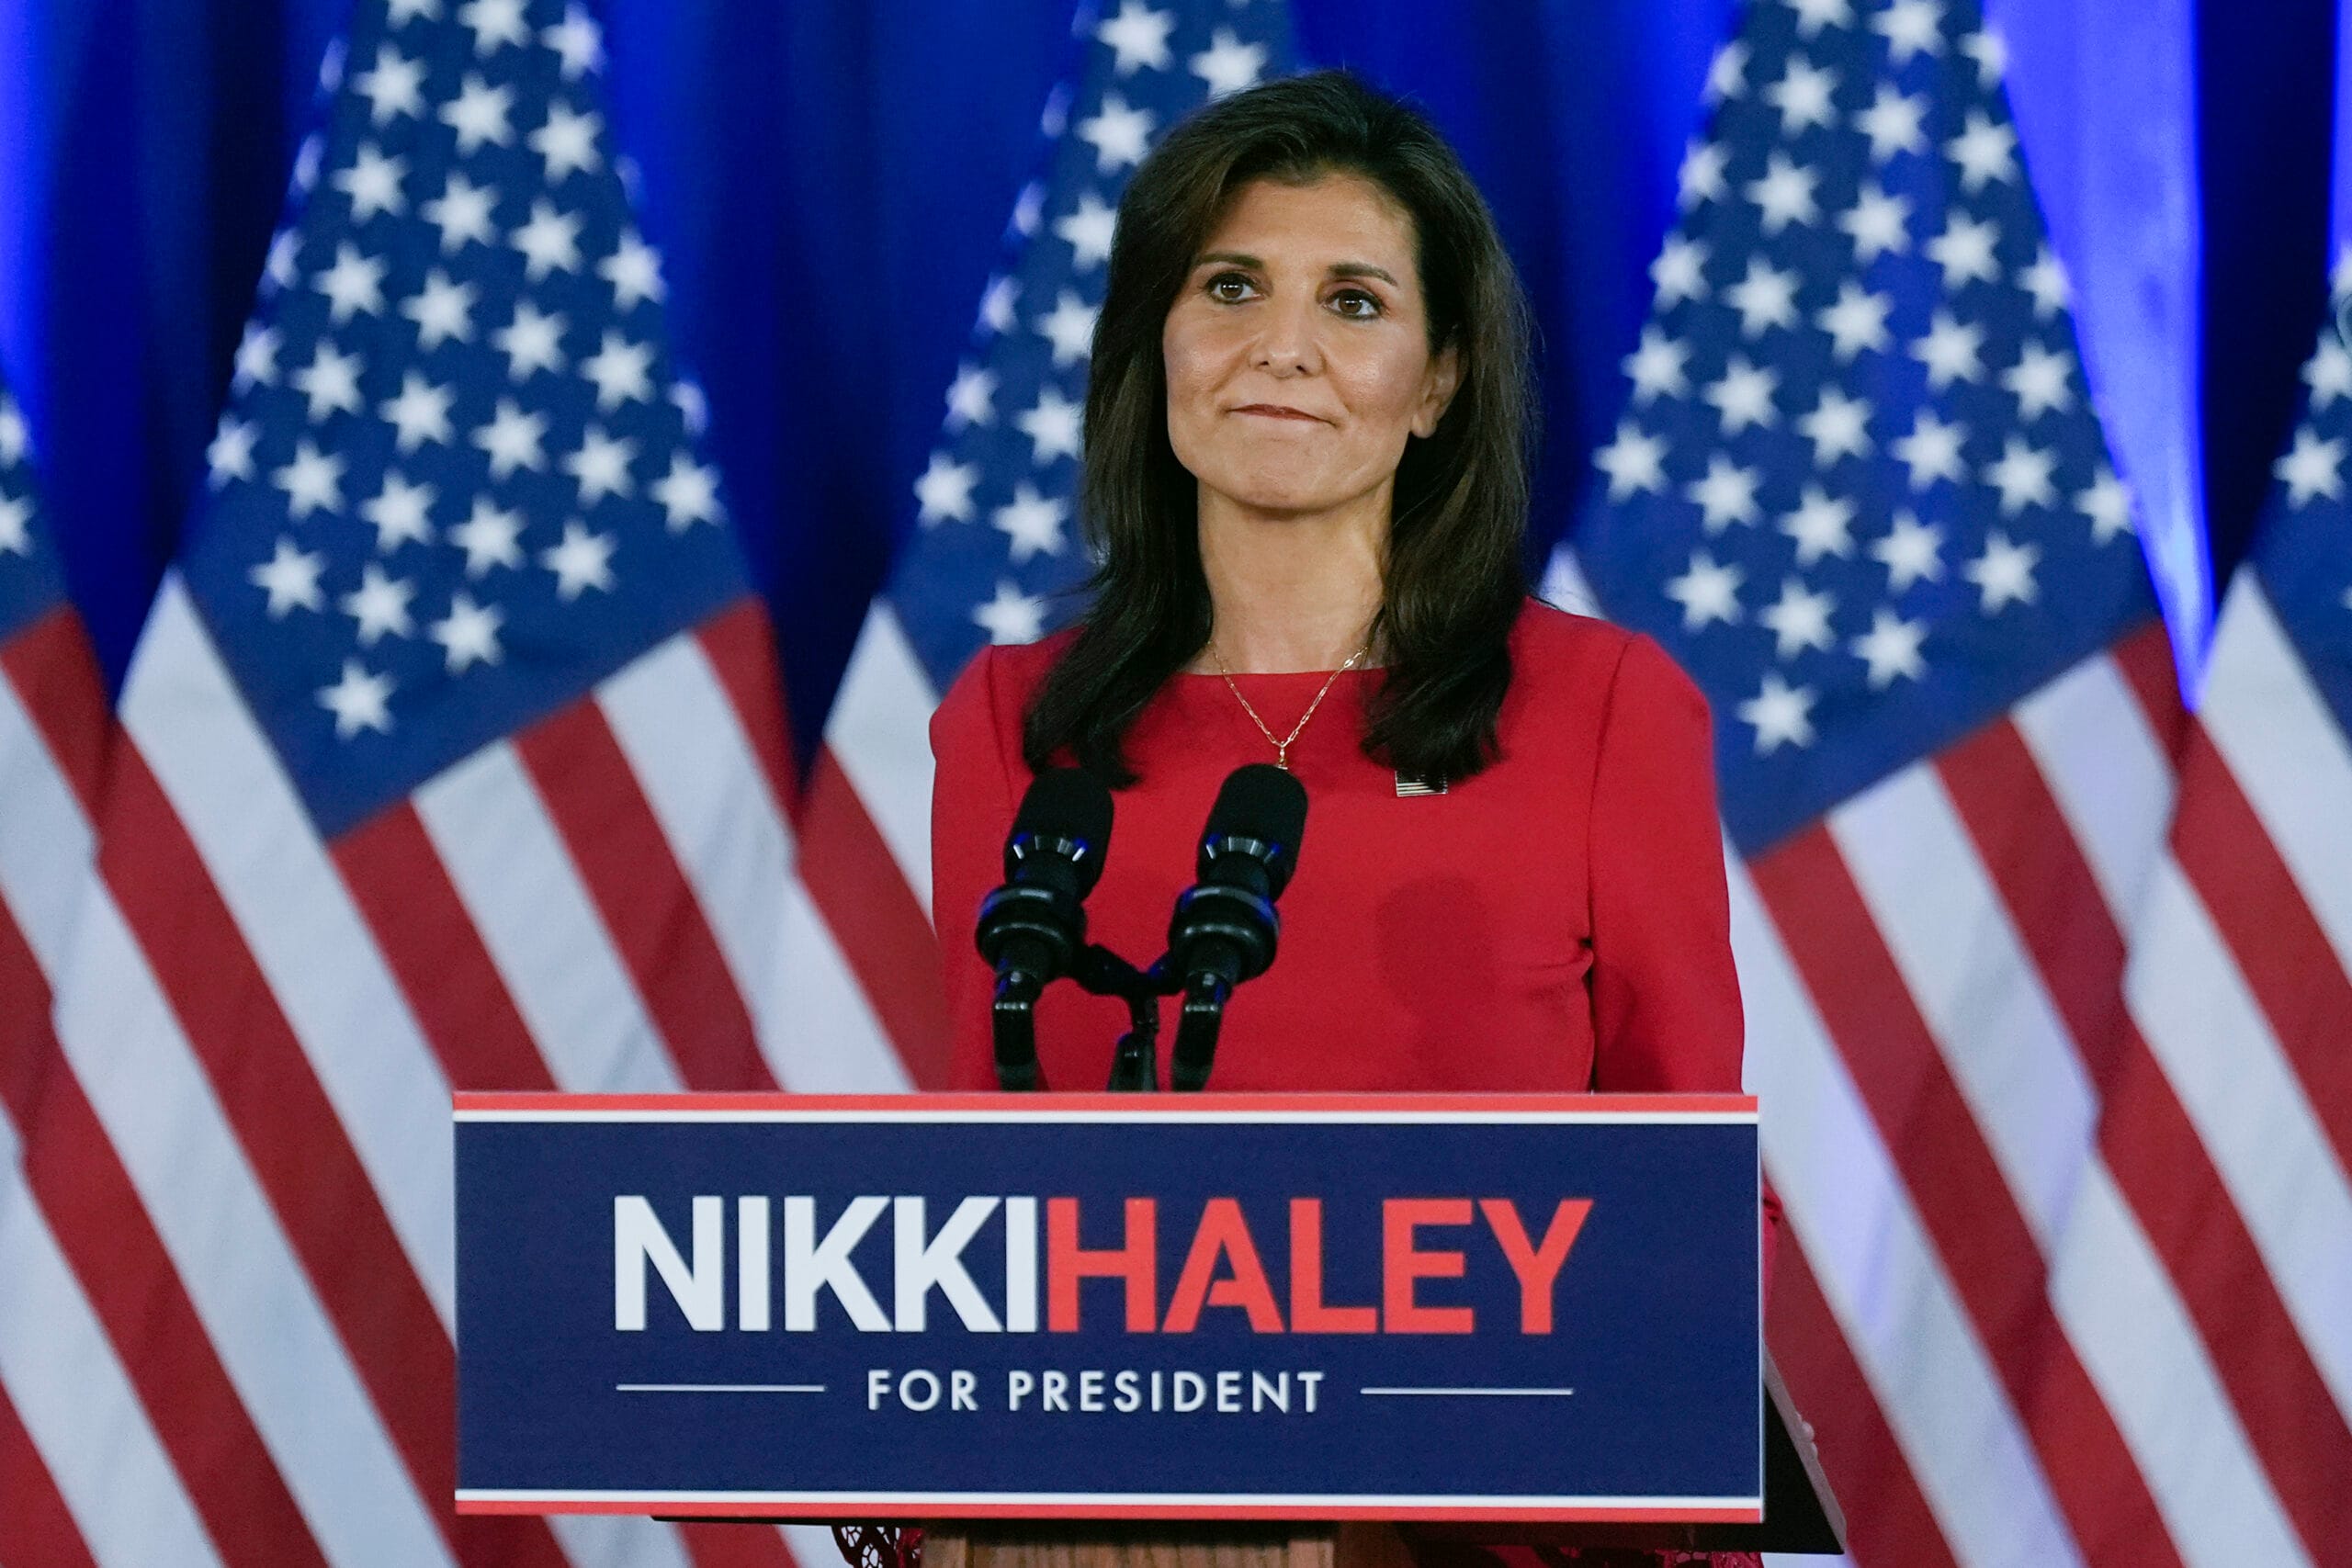 Nikki Haley Suspends 2024 Election Race, Paving the Way for Trump's GOP Nomination